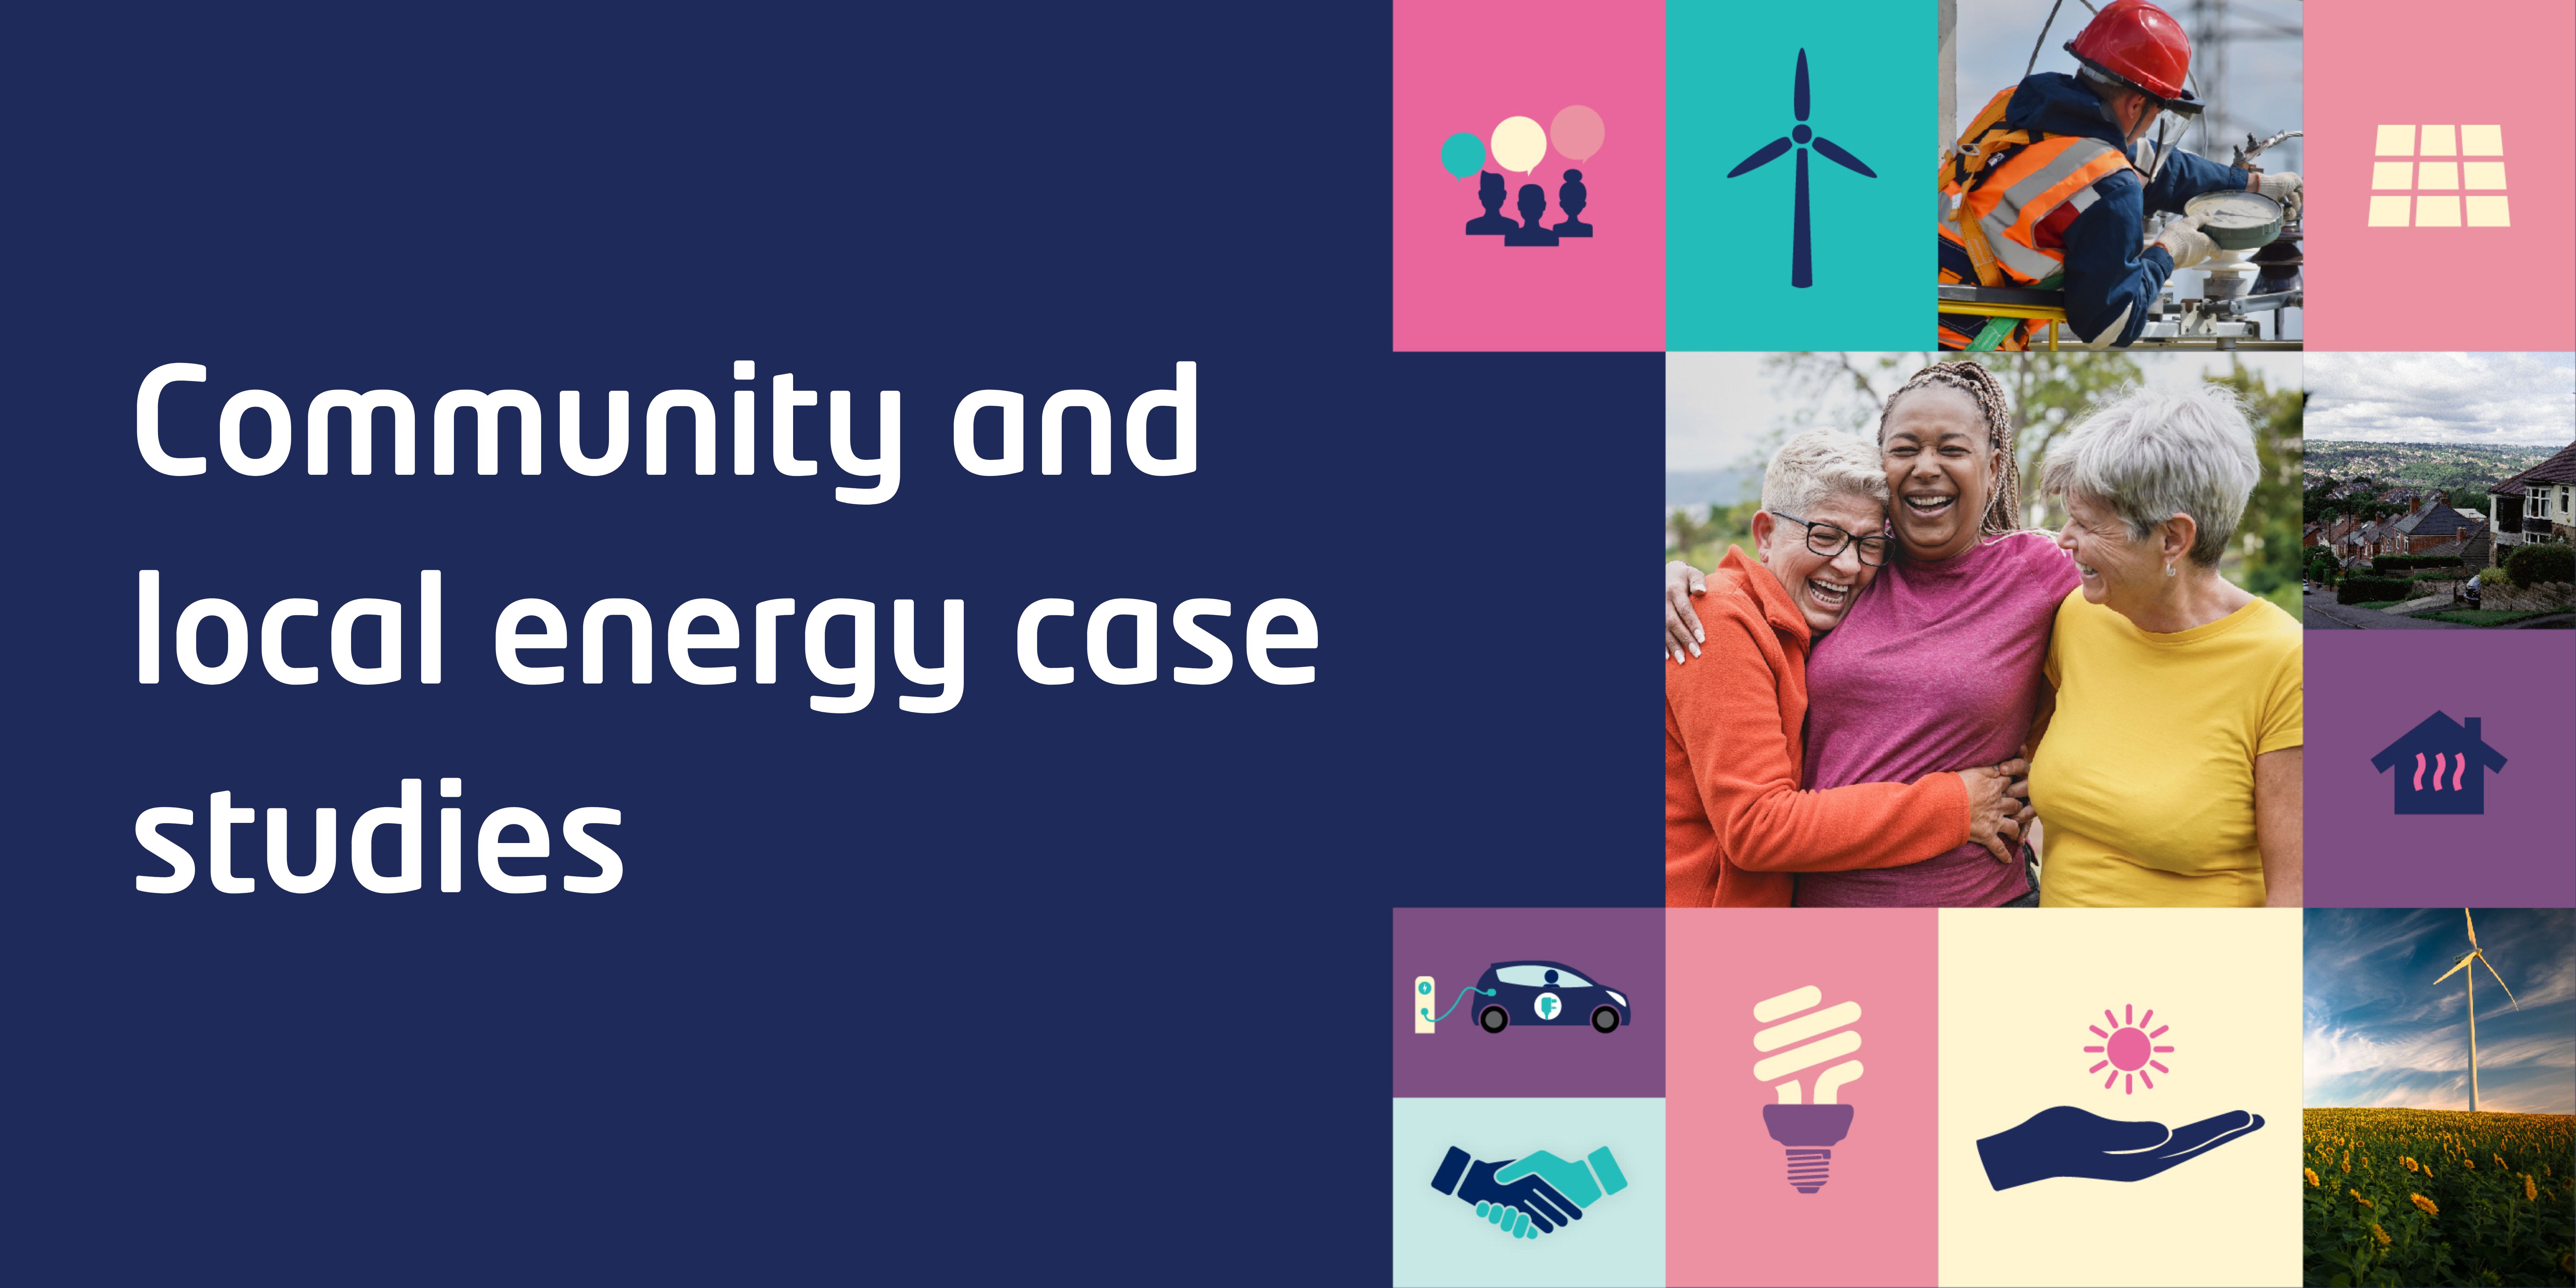 Title banner introducing the page on Community and local energy case studies